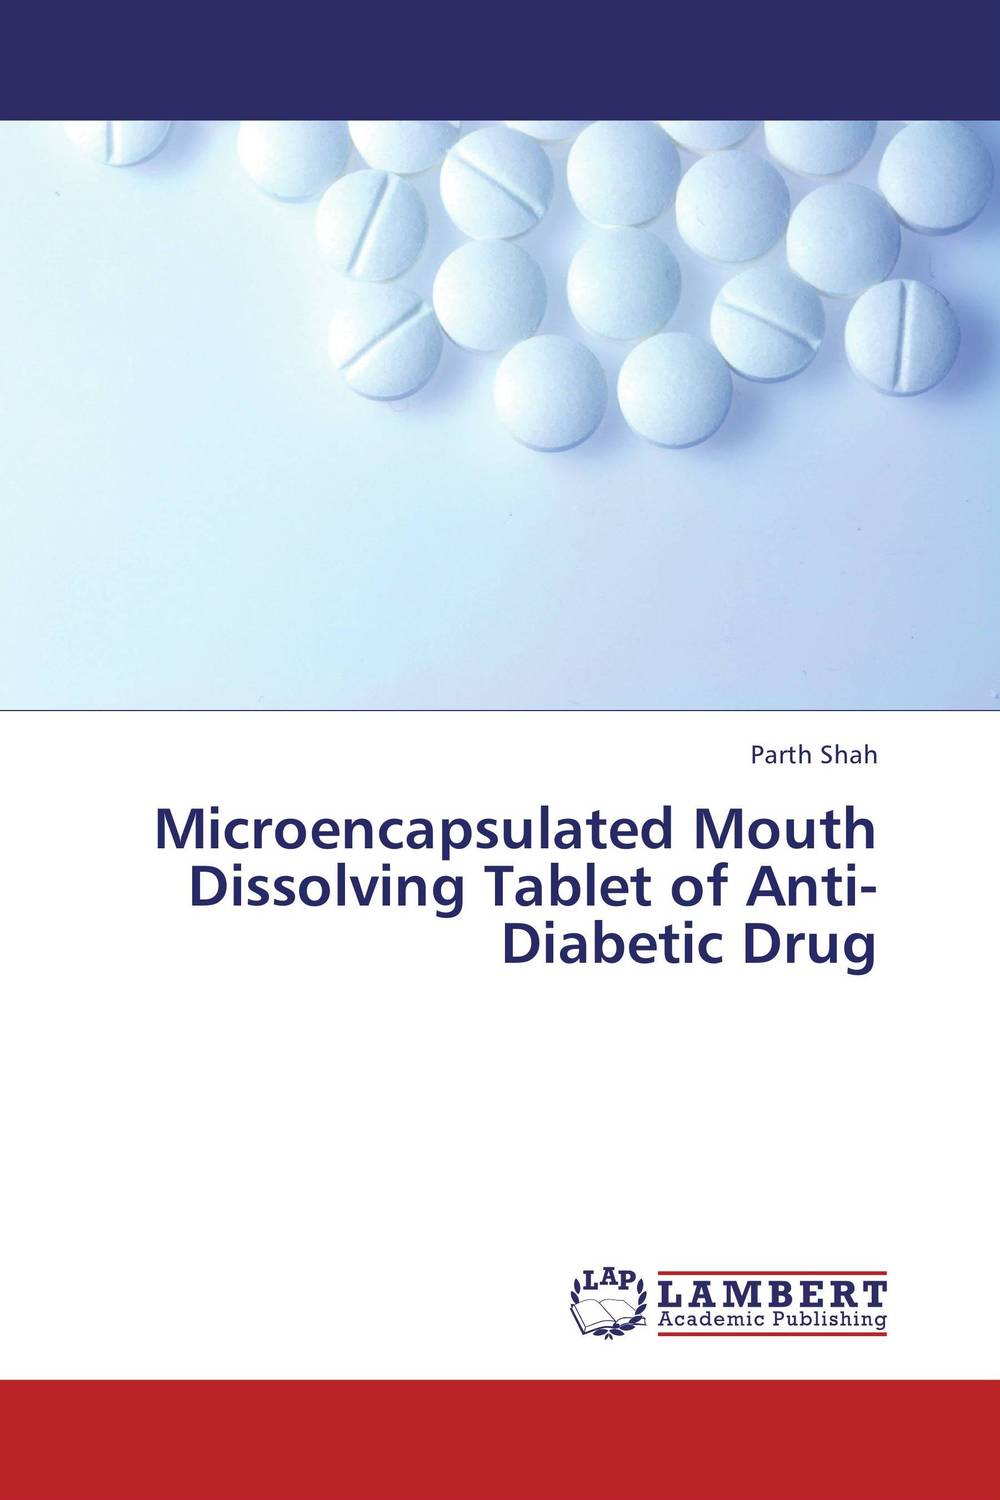 Microencapsulated Mouth Dissolving Tablet of Anti-Diabetic Drug